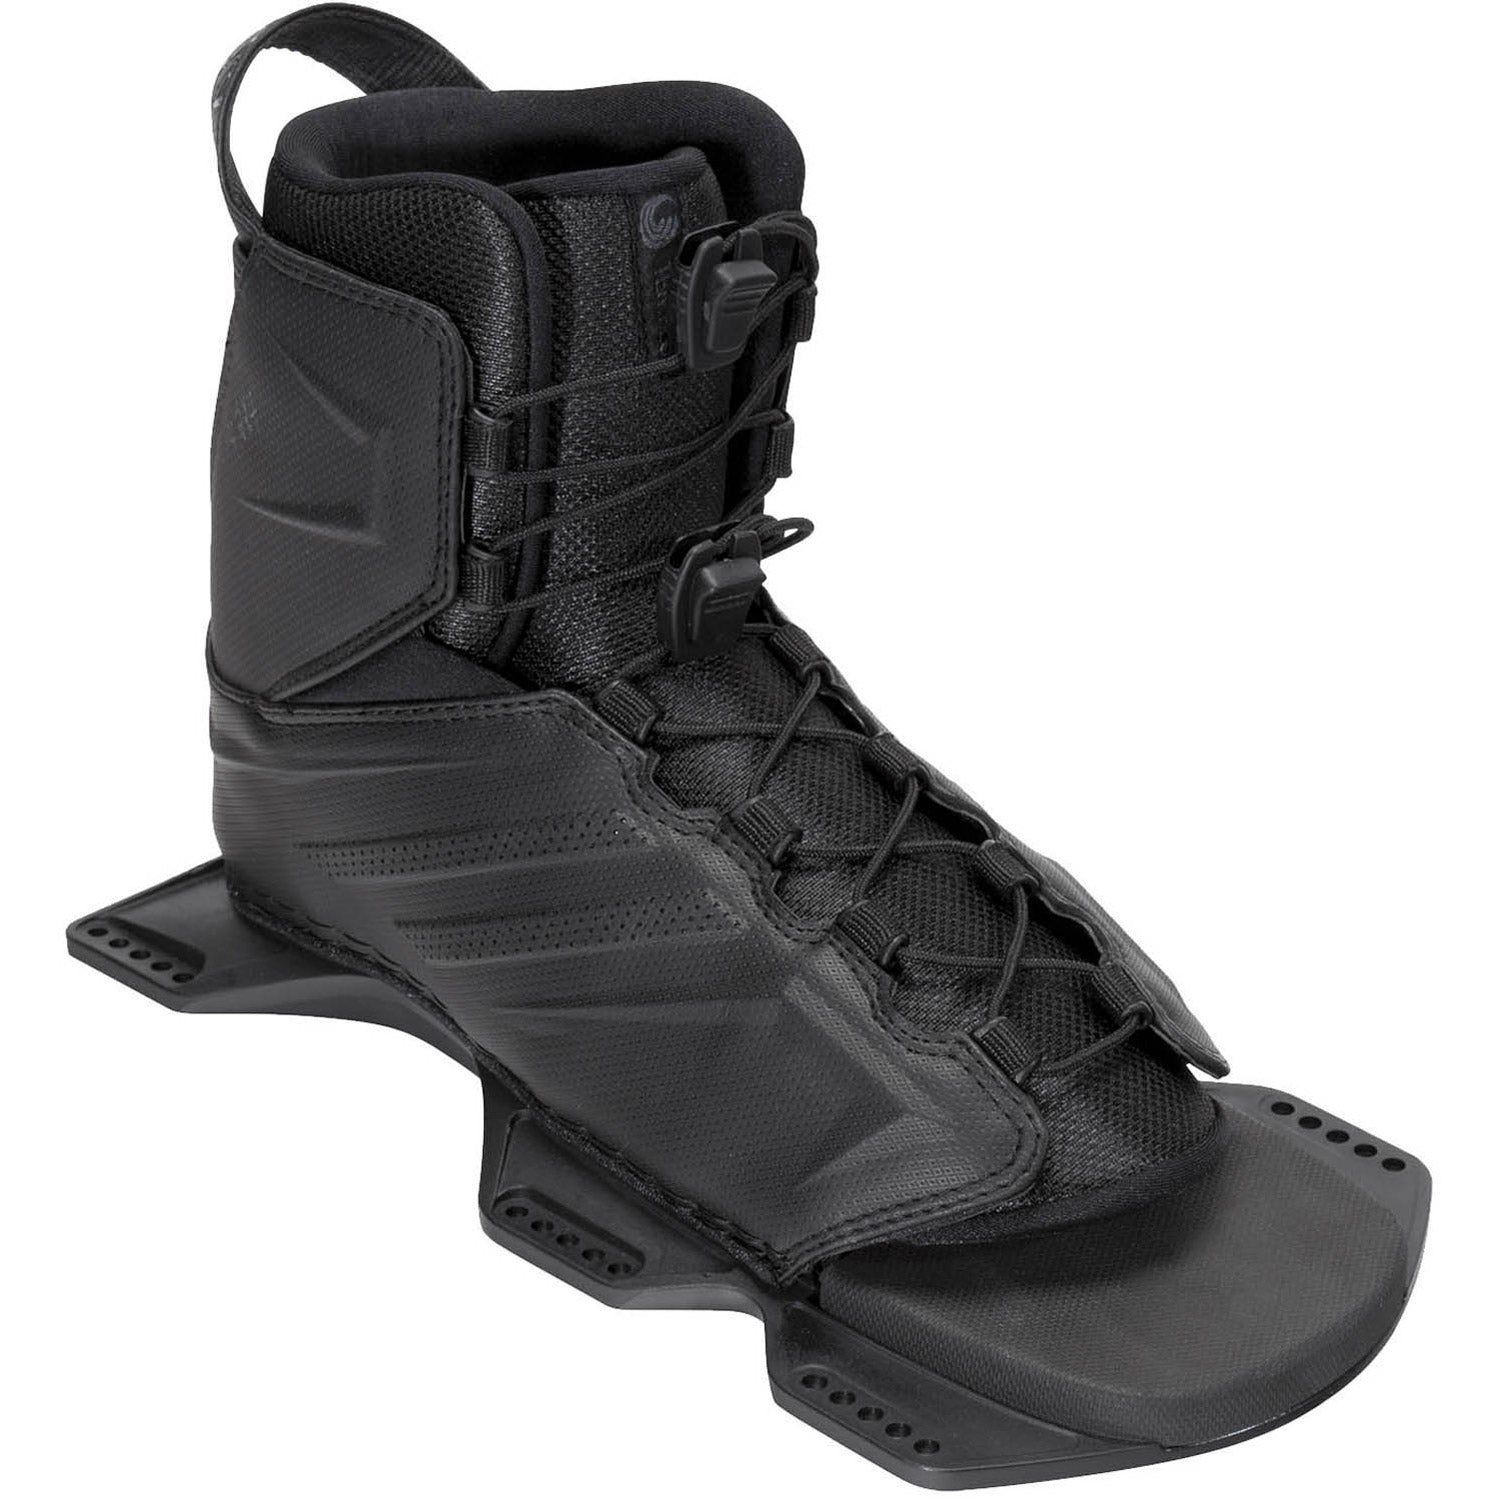 Connelly Tempest Slalom Ski Boot 2021